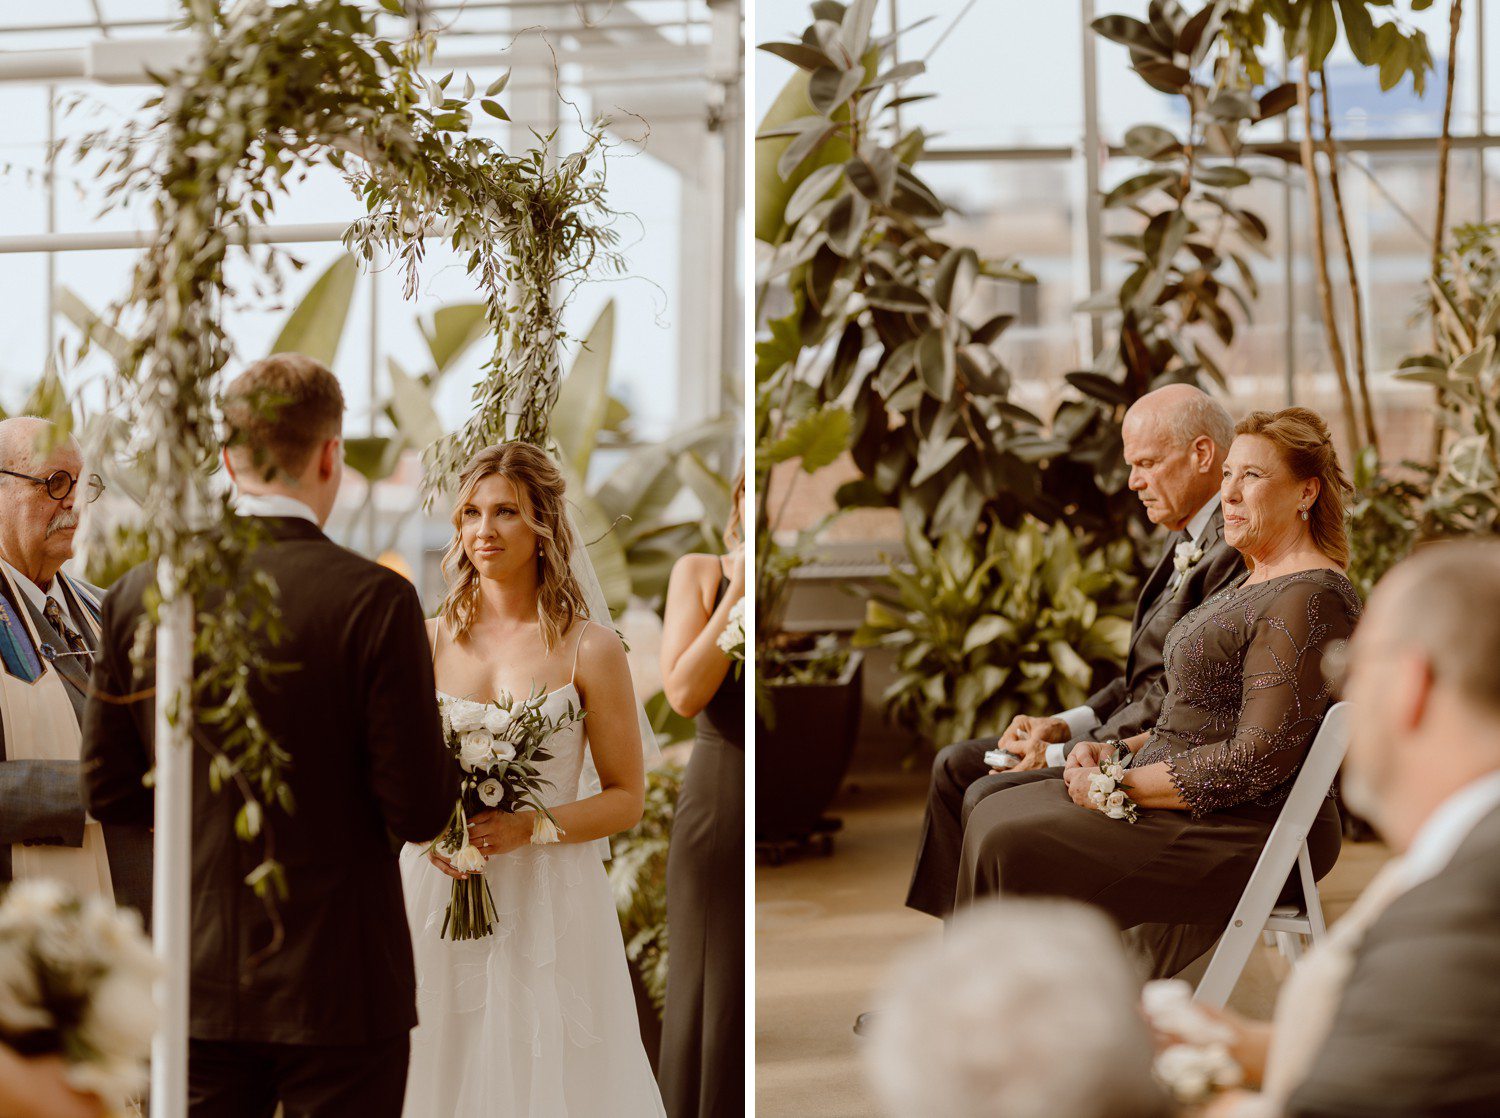 Greenhouse Wedding Ceremony at Downtown Market Grand Rapids